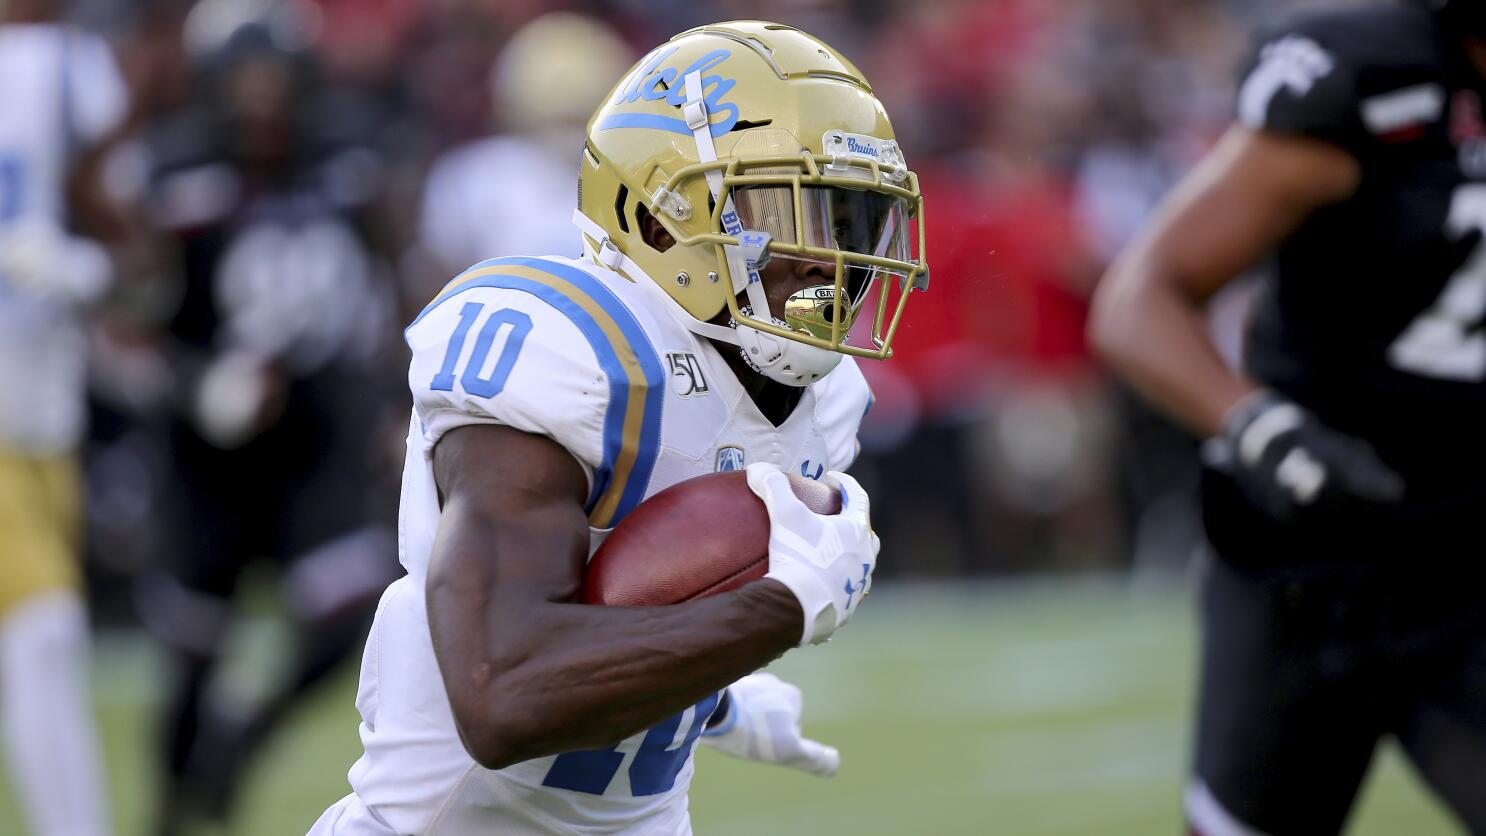 The Sports Report: UCLA starts its football season today - Los Angeles Times